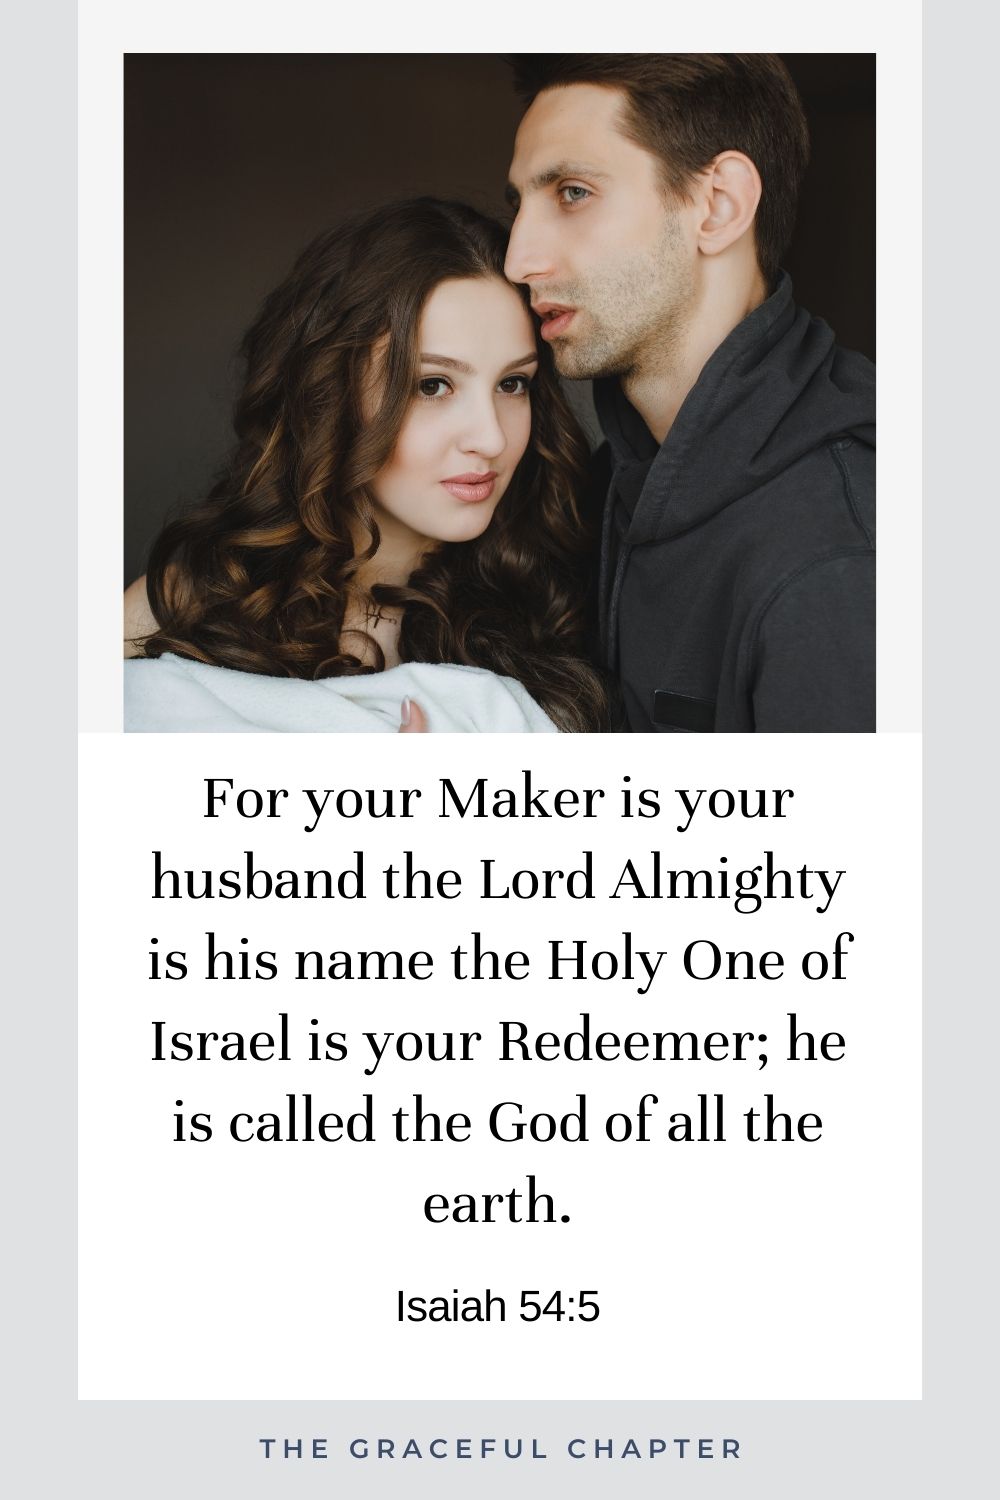 For your Maker is your husband the Lord Almighty is his name the Holy One of Israel is your Redeemer; he is called the God of all the earth. Isaiah 54:5